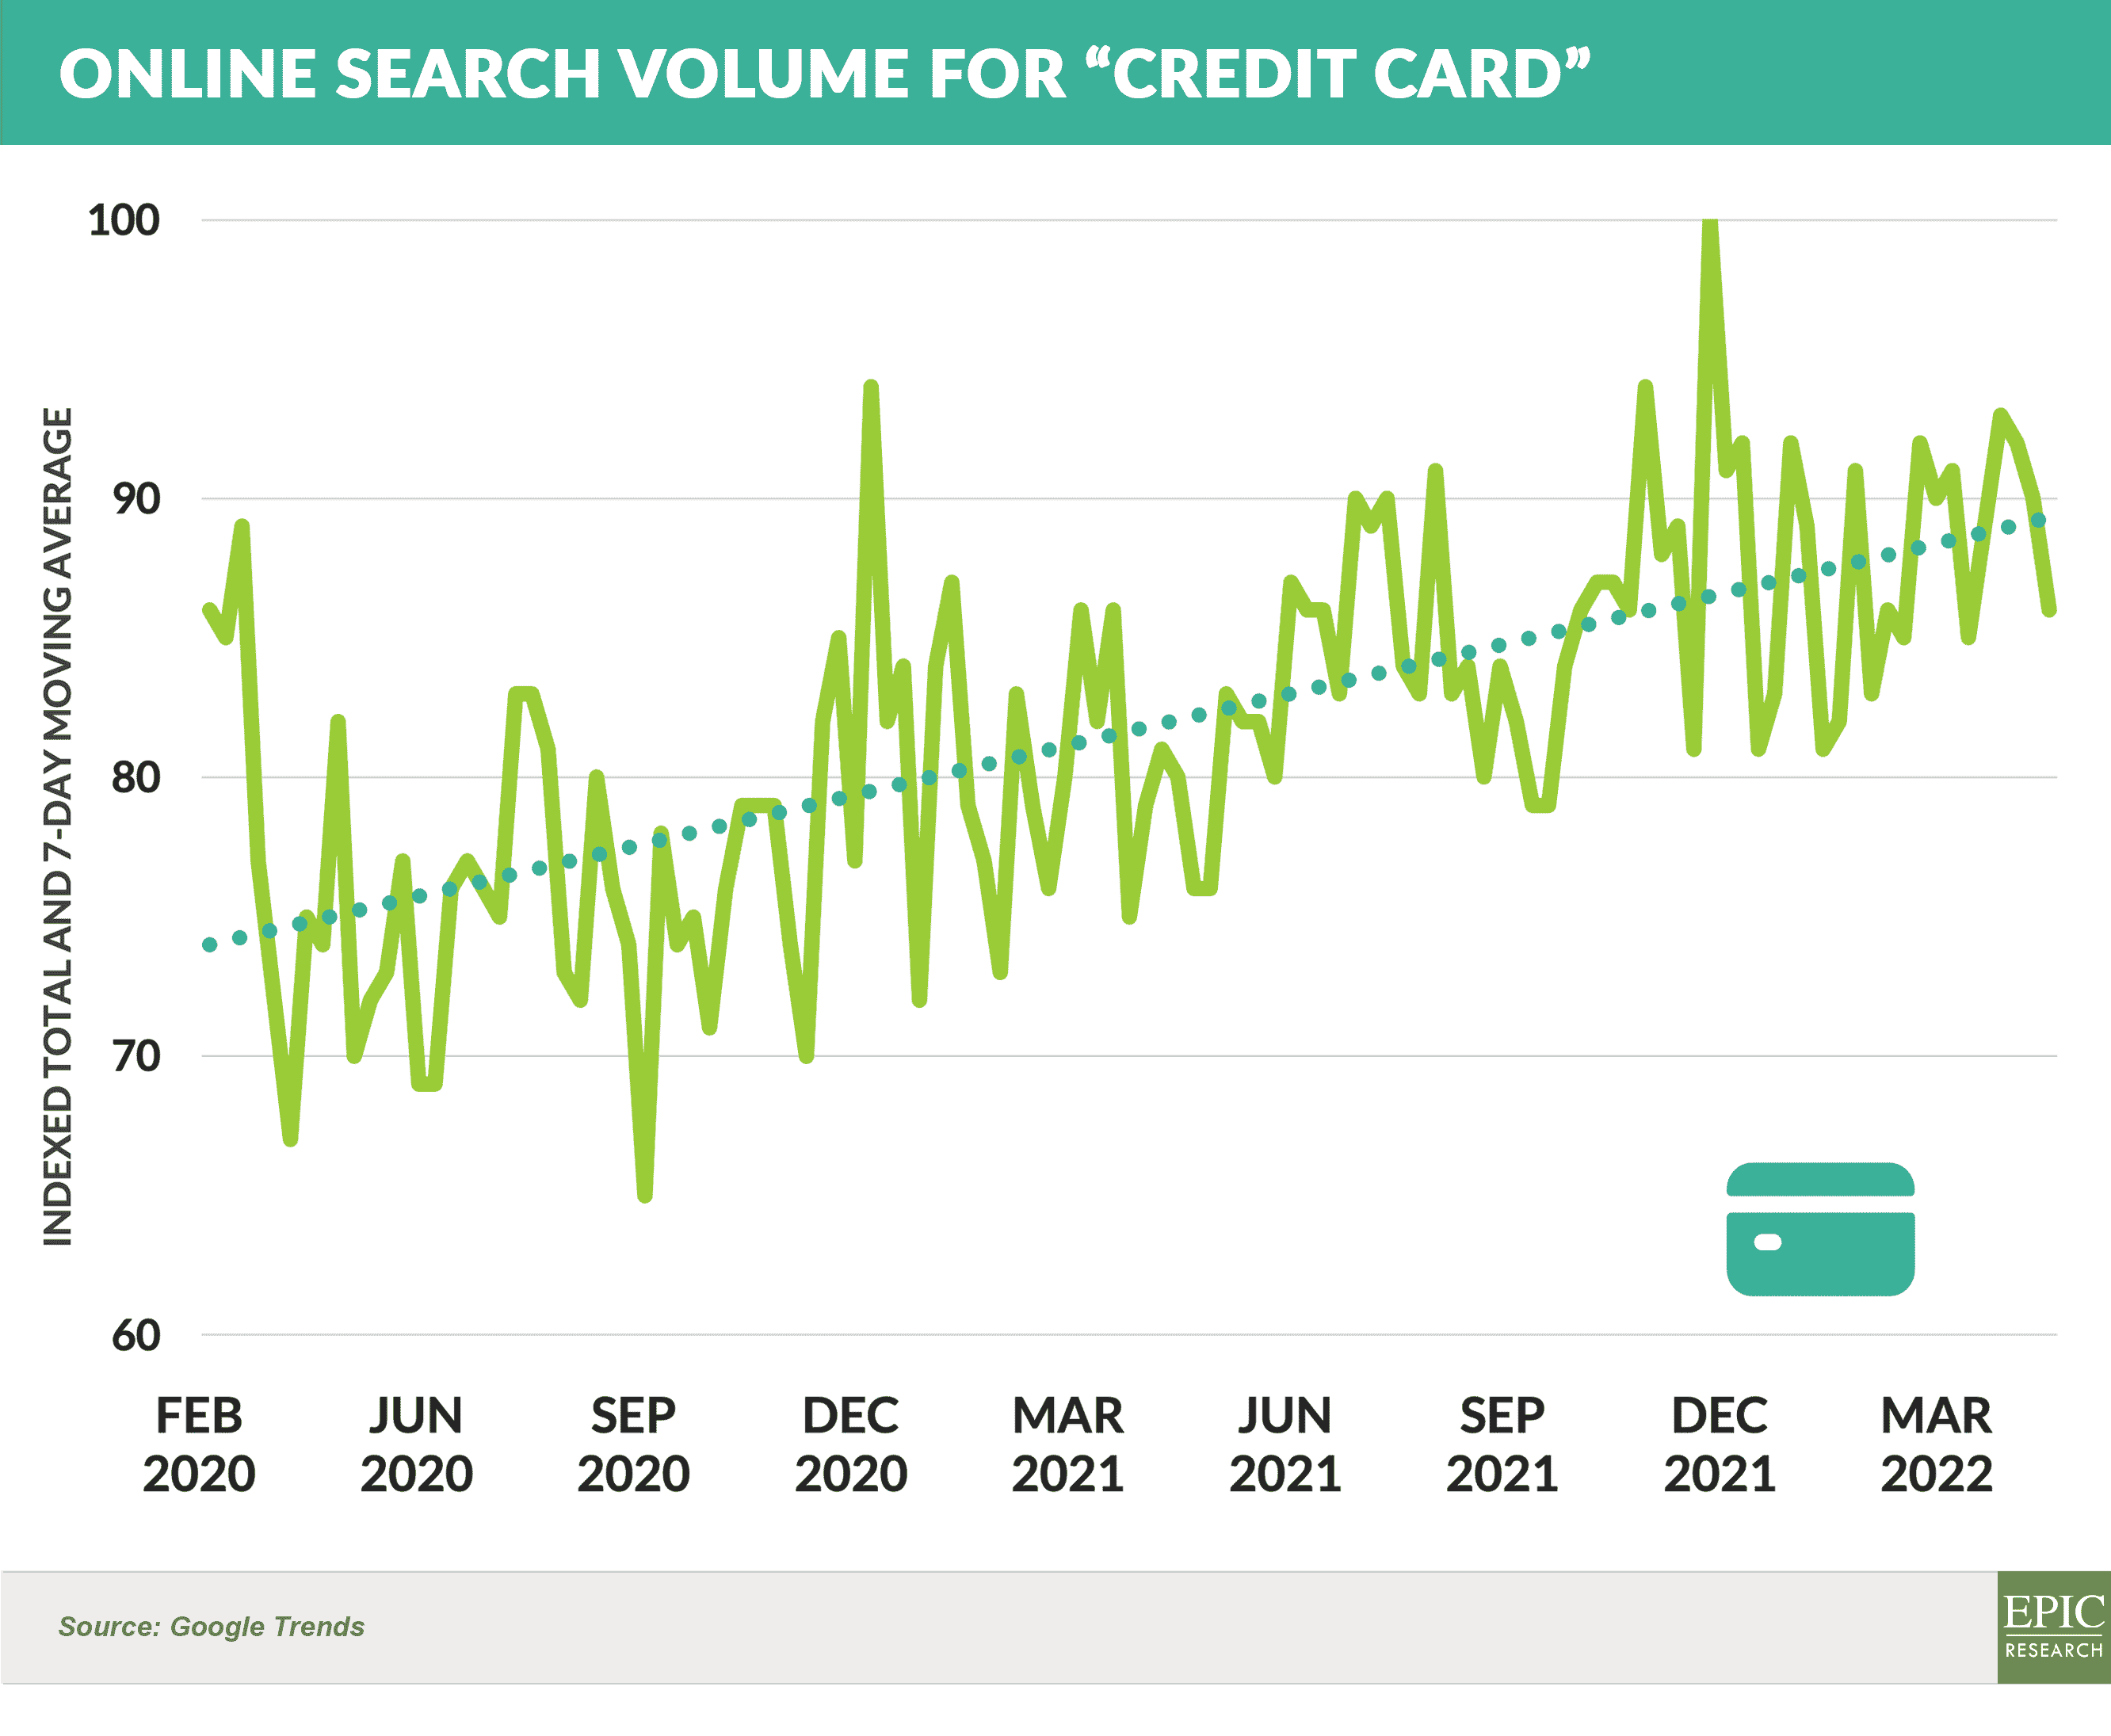 Online Search Volume for “Credit Card”